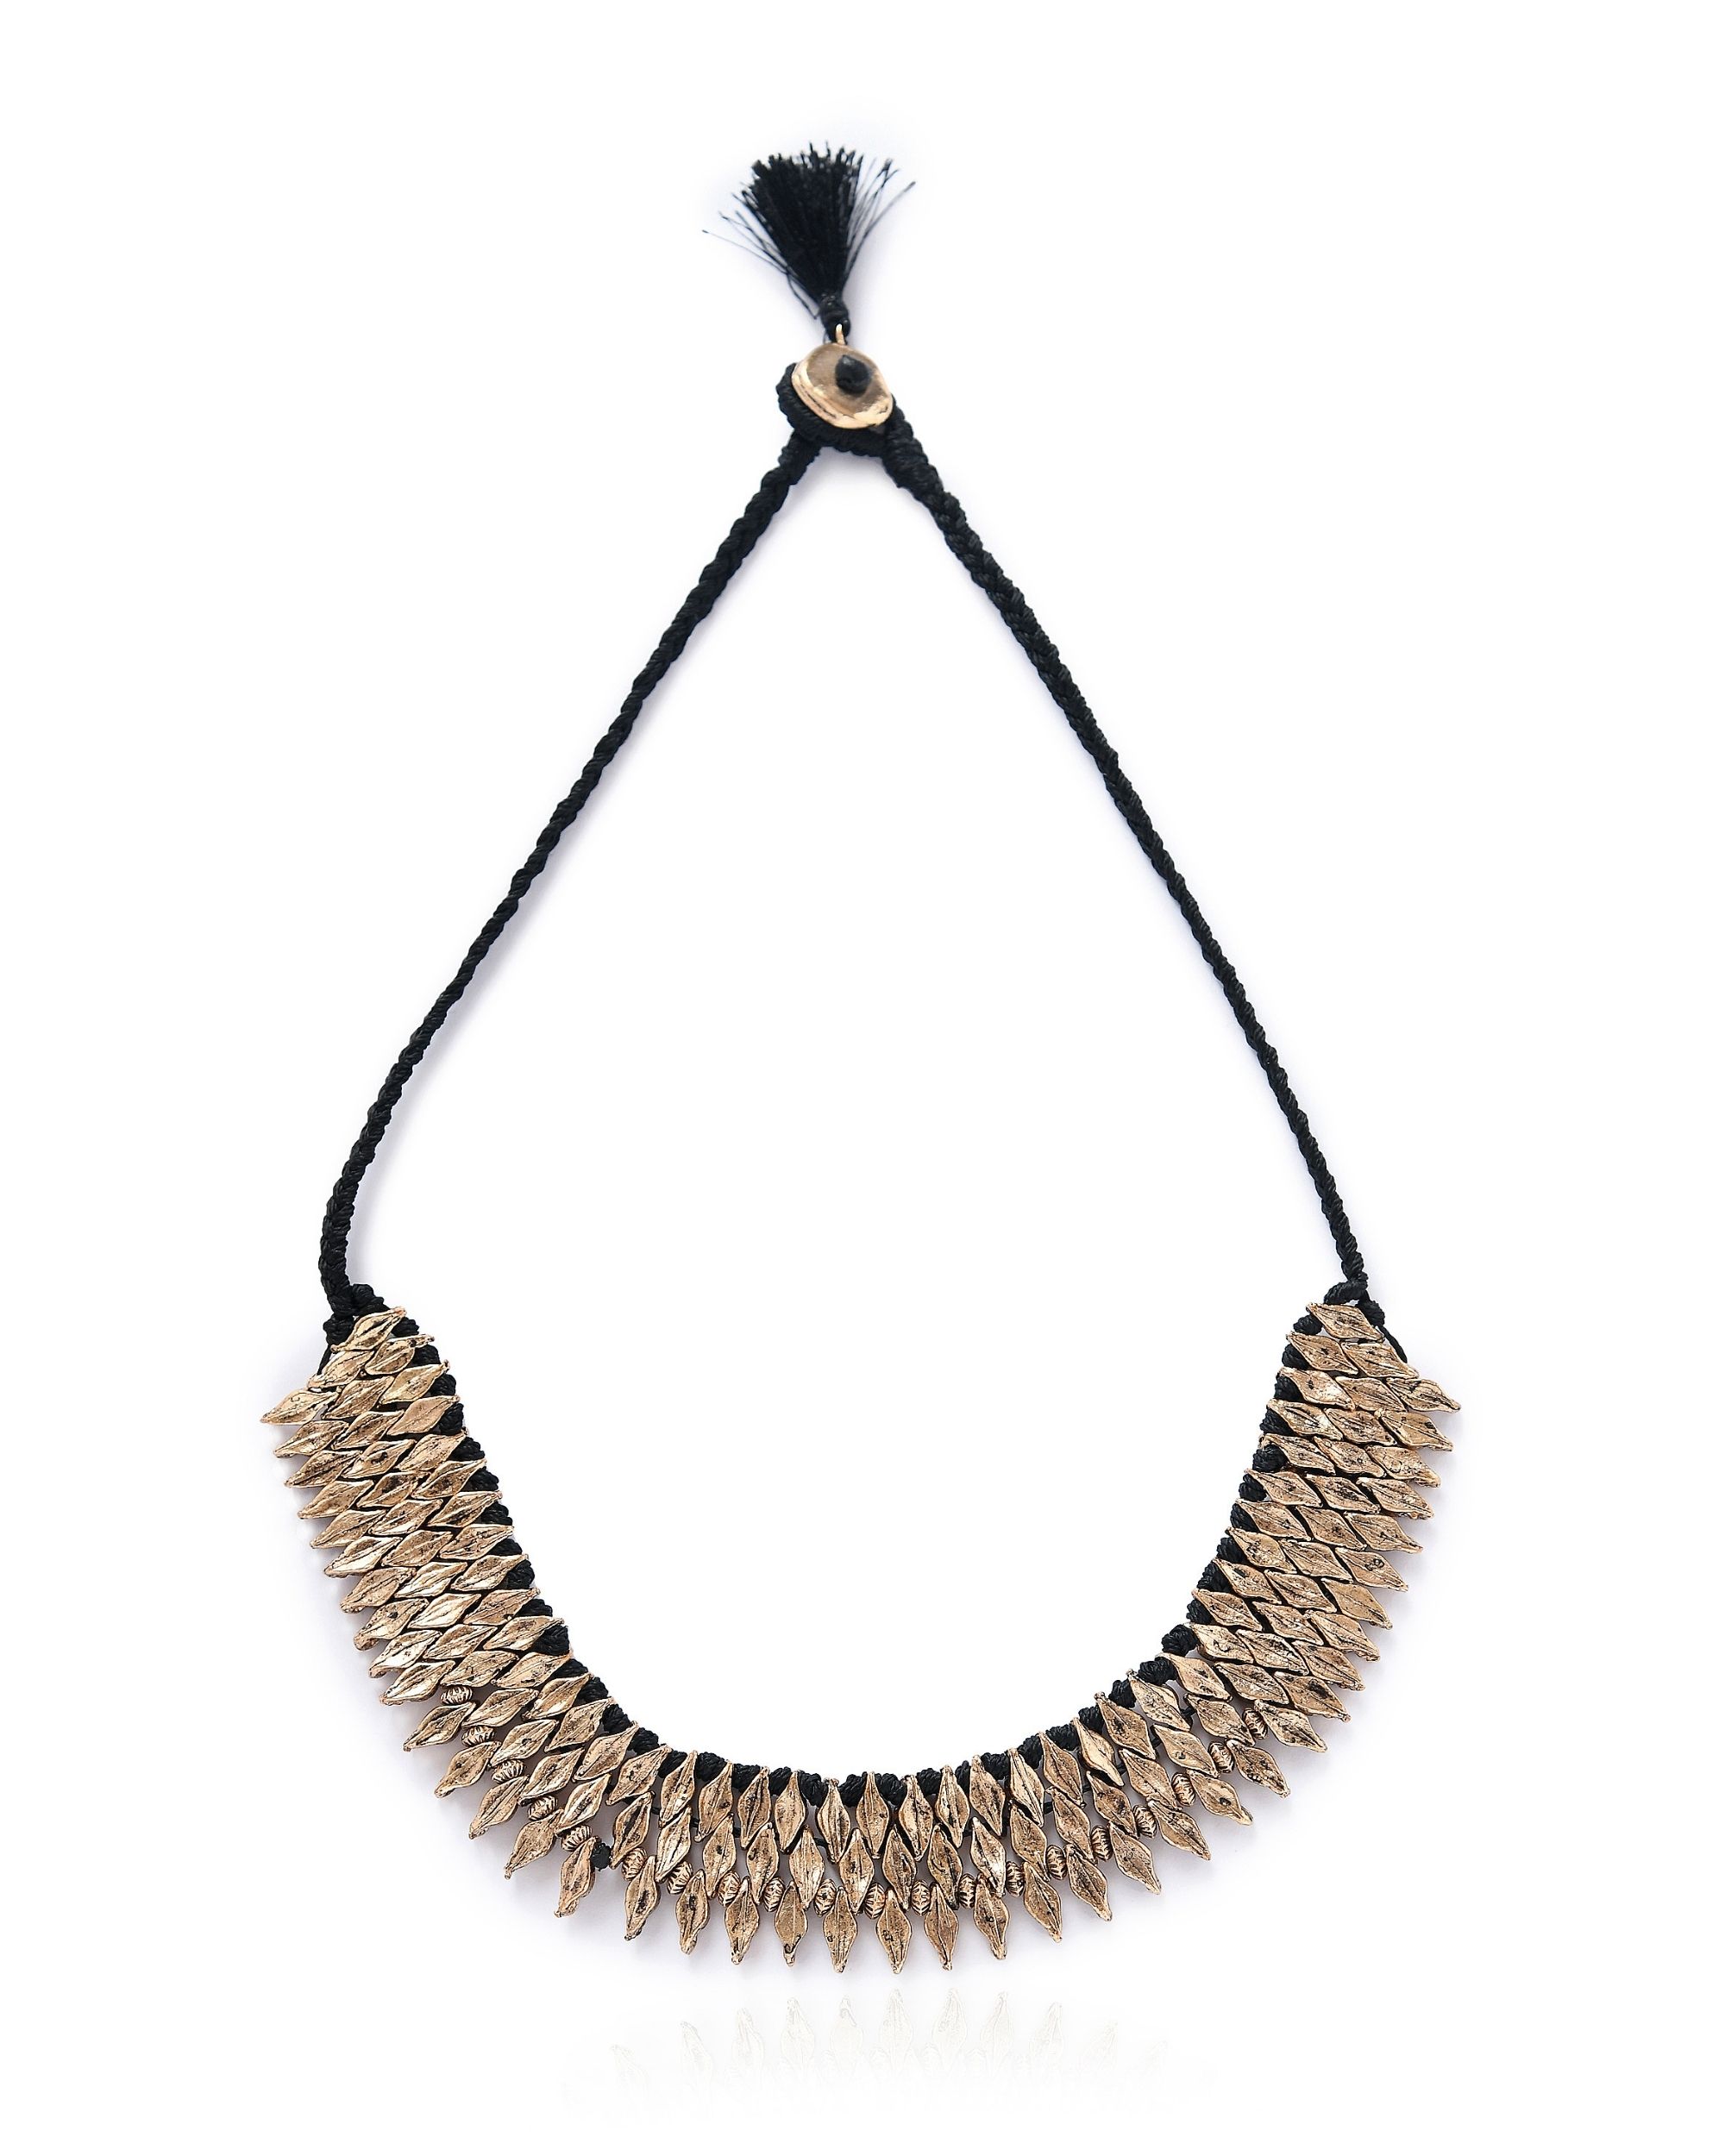 Black thread necklace by Amoliconcepts | The Secret Label